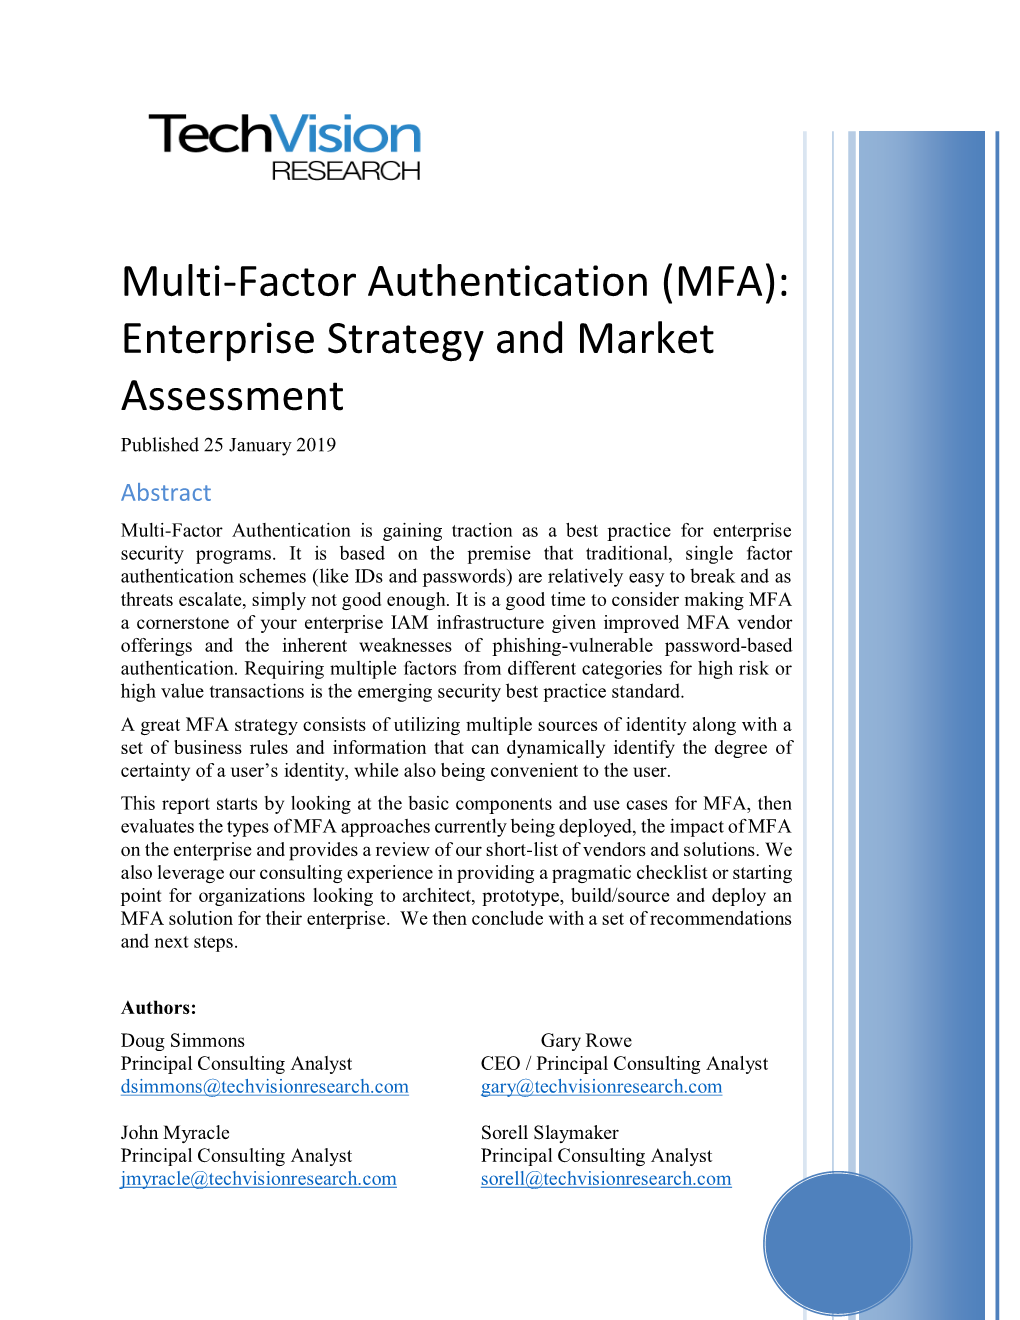 Multi-Factor Authentication (MFA): Enterprise Strategy and Market Assessment